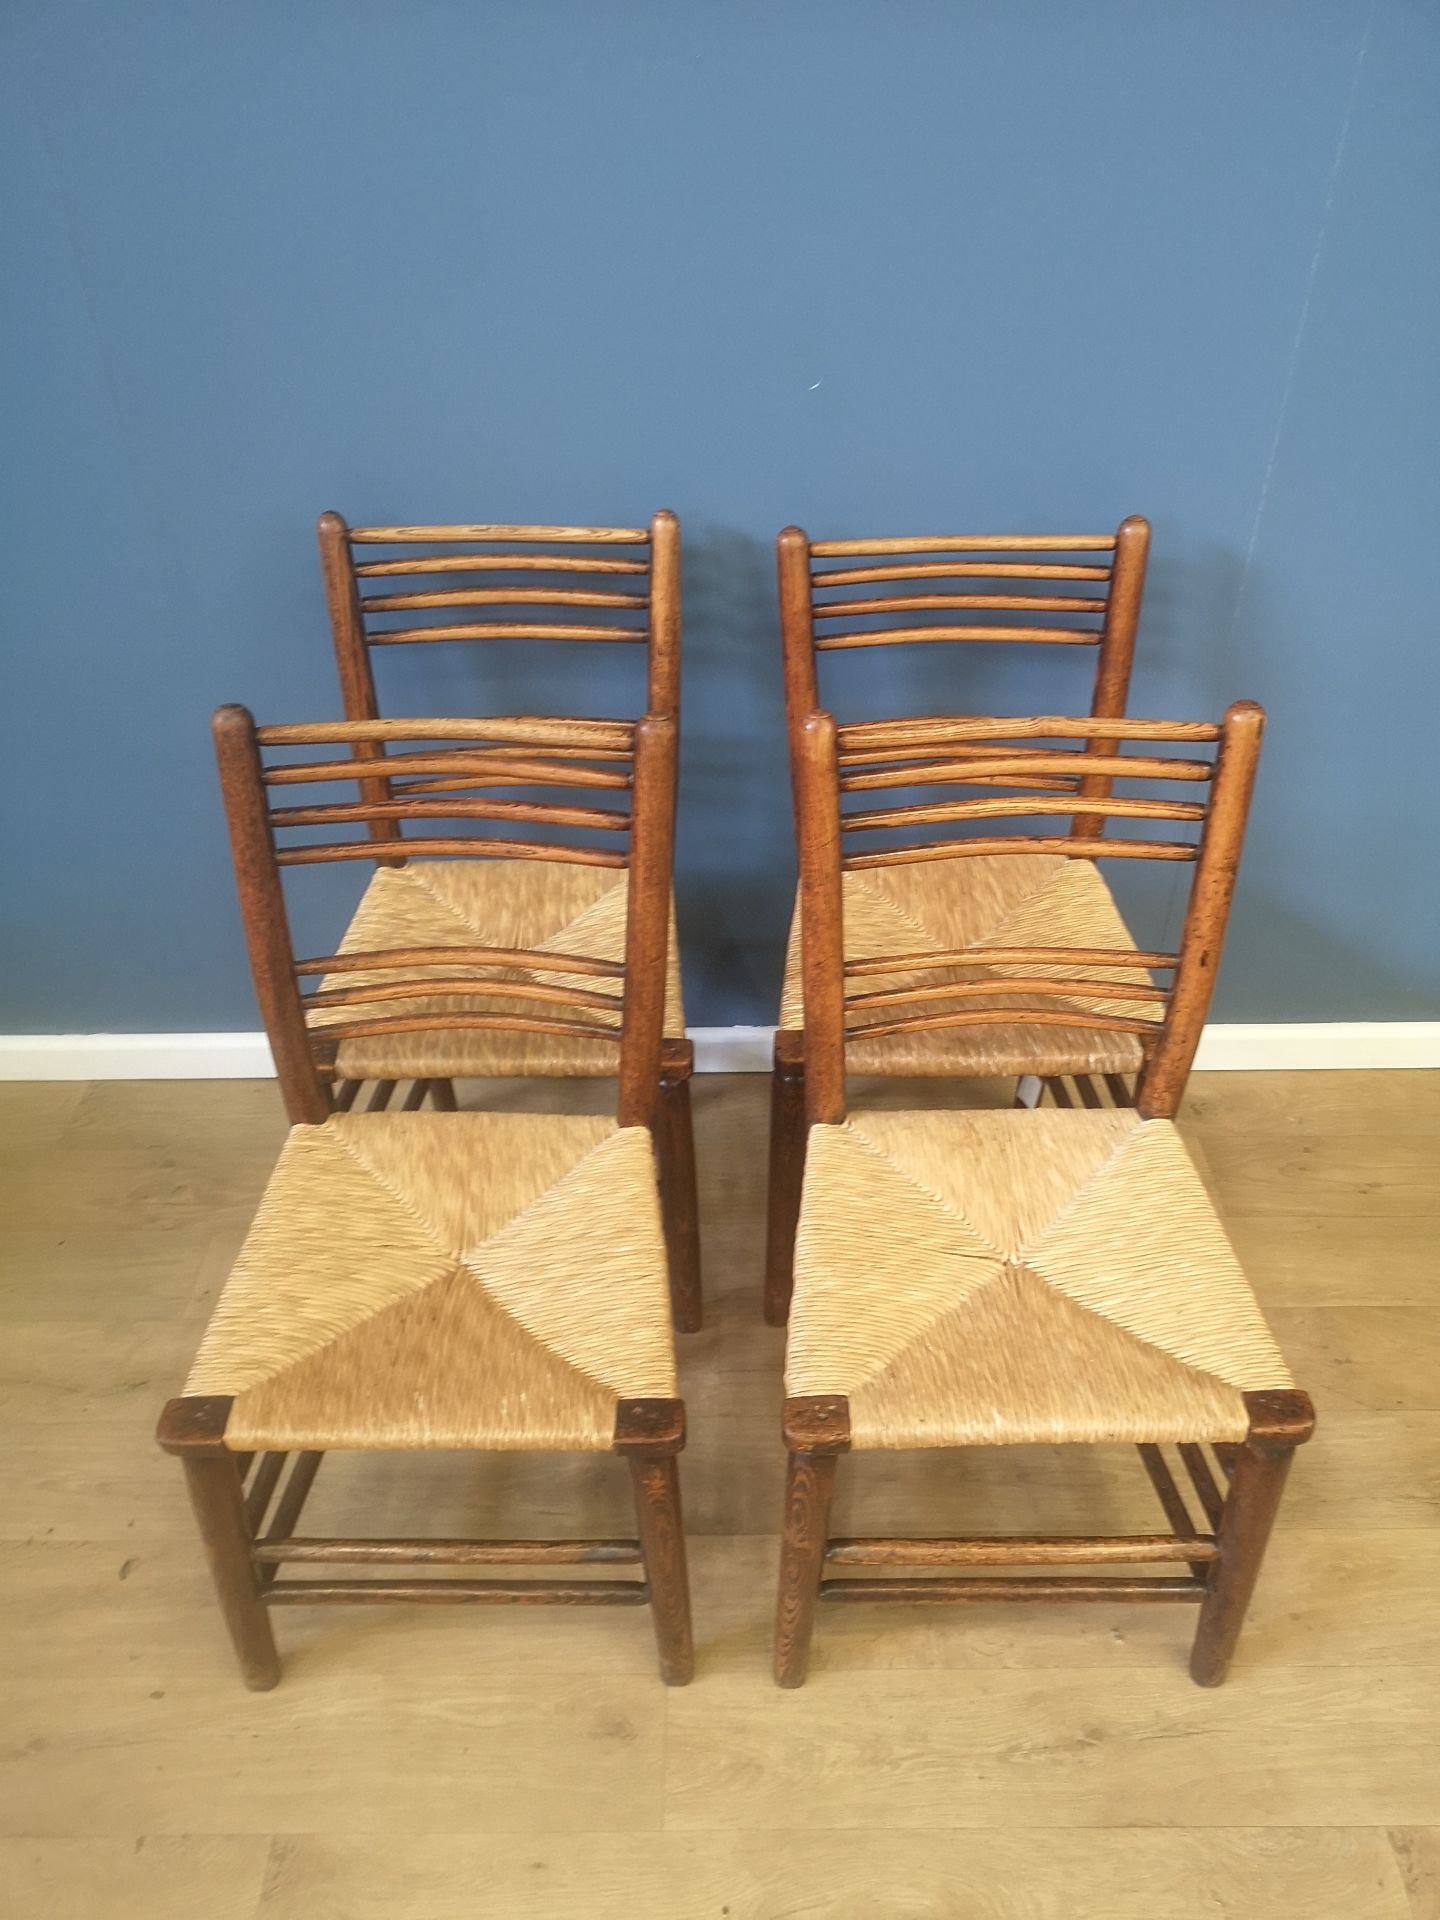 Set of four 19th century oak ladderback chairs - Image 2 of 5